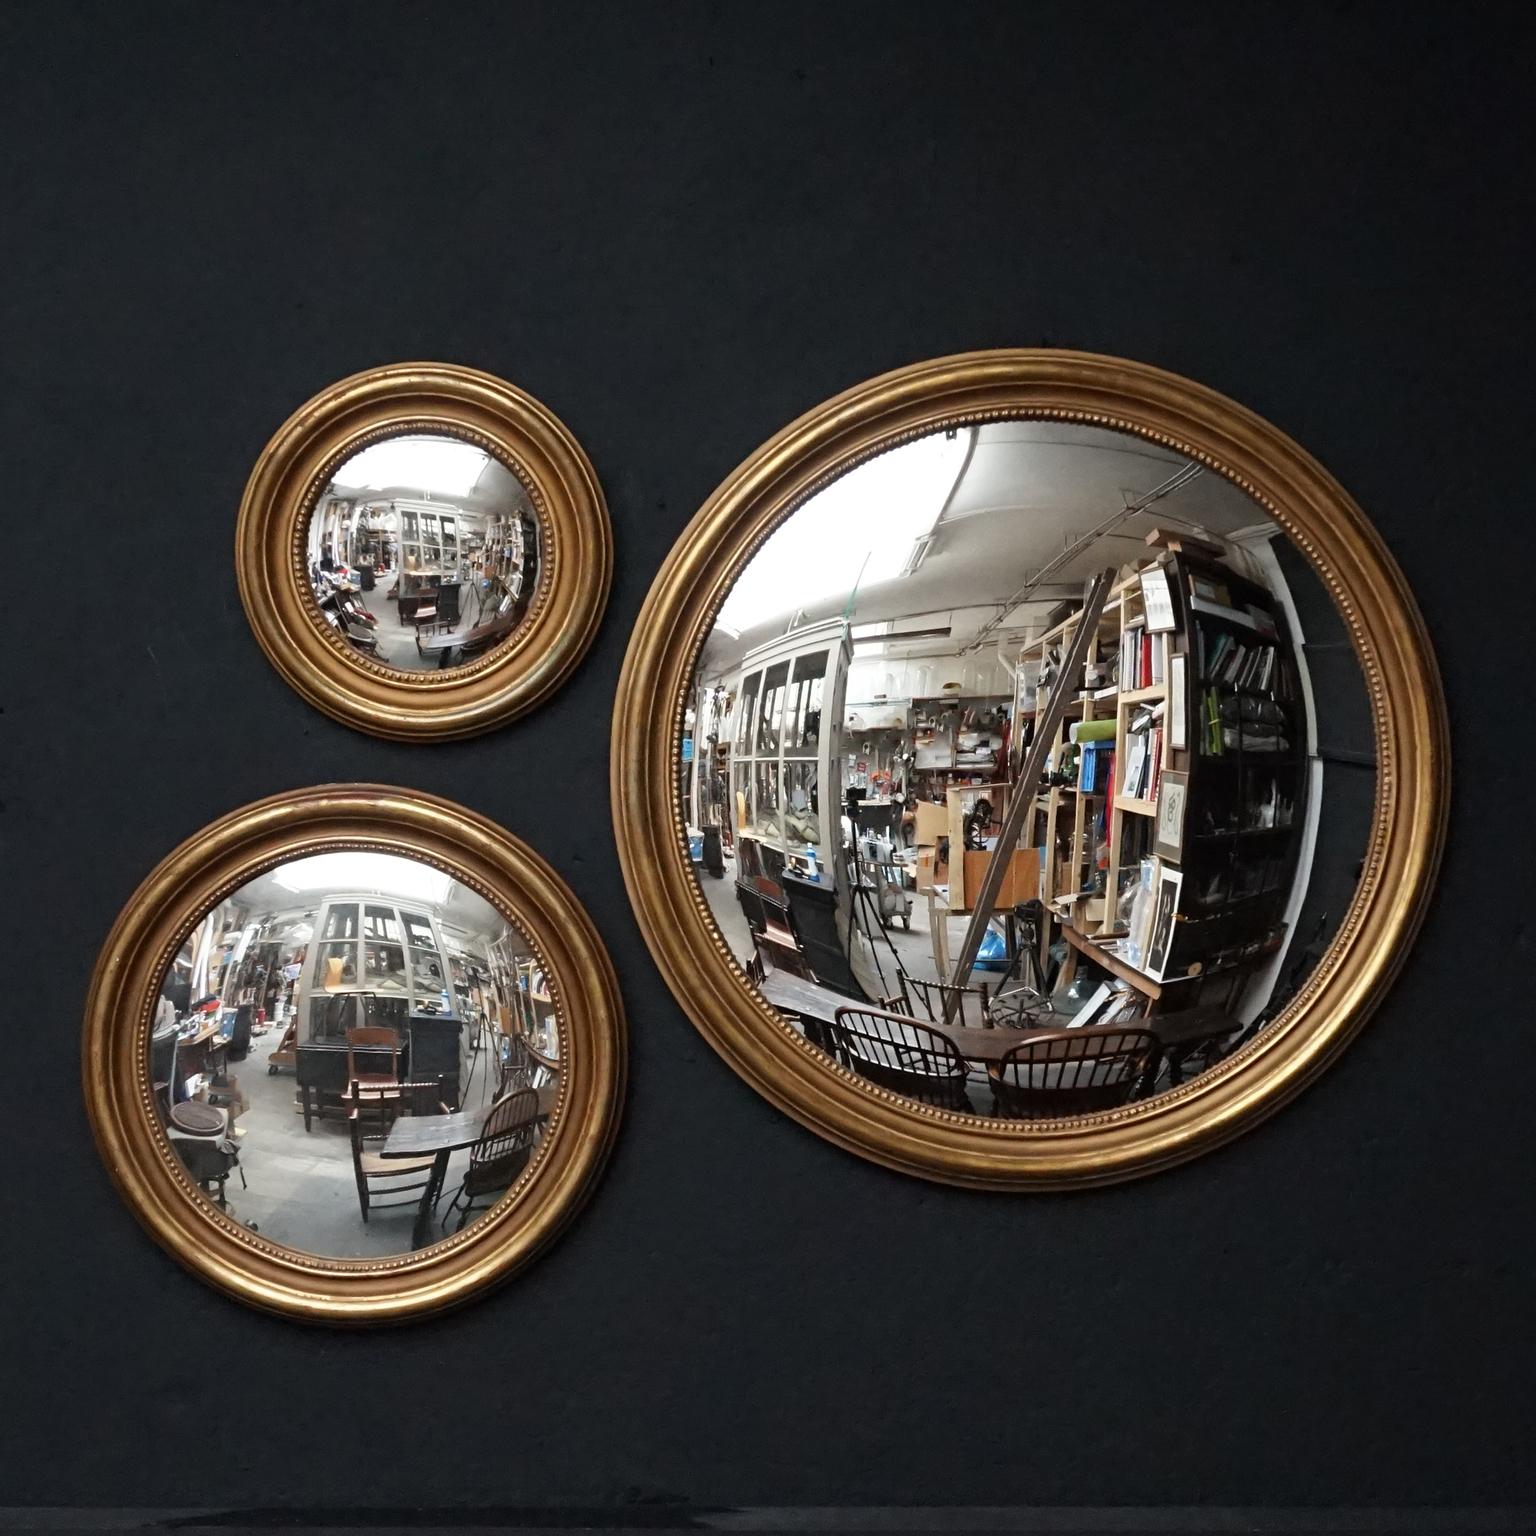 This perfect statement wall decoration consists of two (so not three, the 'medium' size is sold) round convex mirrors in relief pearled plastered giltwood frames. 
Great addition to any wall or an impactful statement on its own. 

Measures: Large